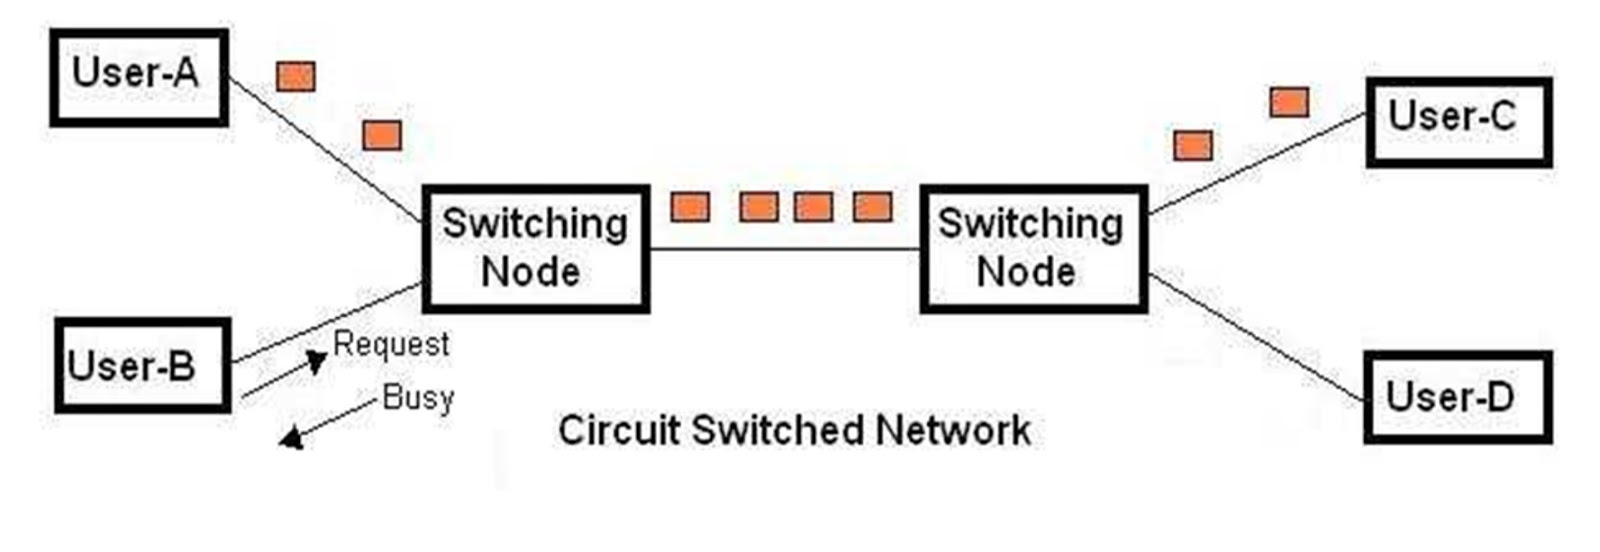 Circuit Switching. Switch circuit. Circuit Switch and Packet Switch. Packet Switching схема. User switching